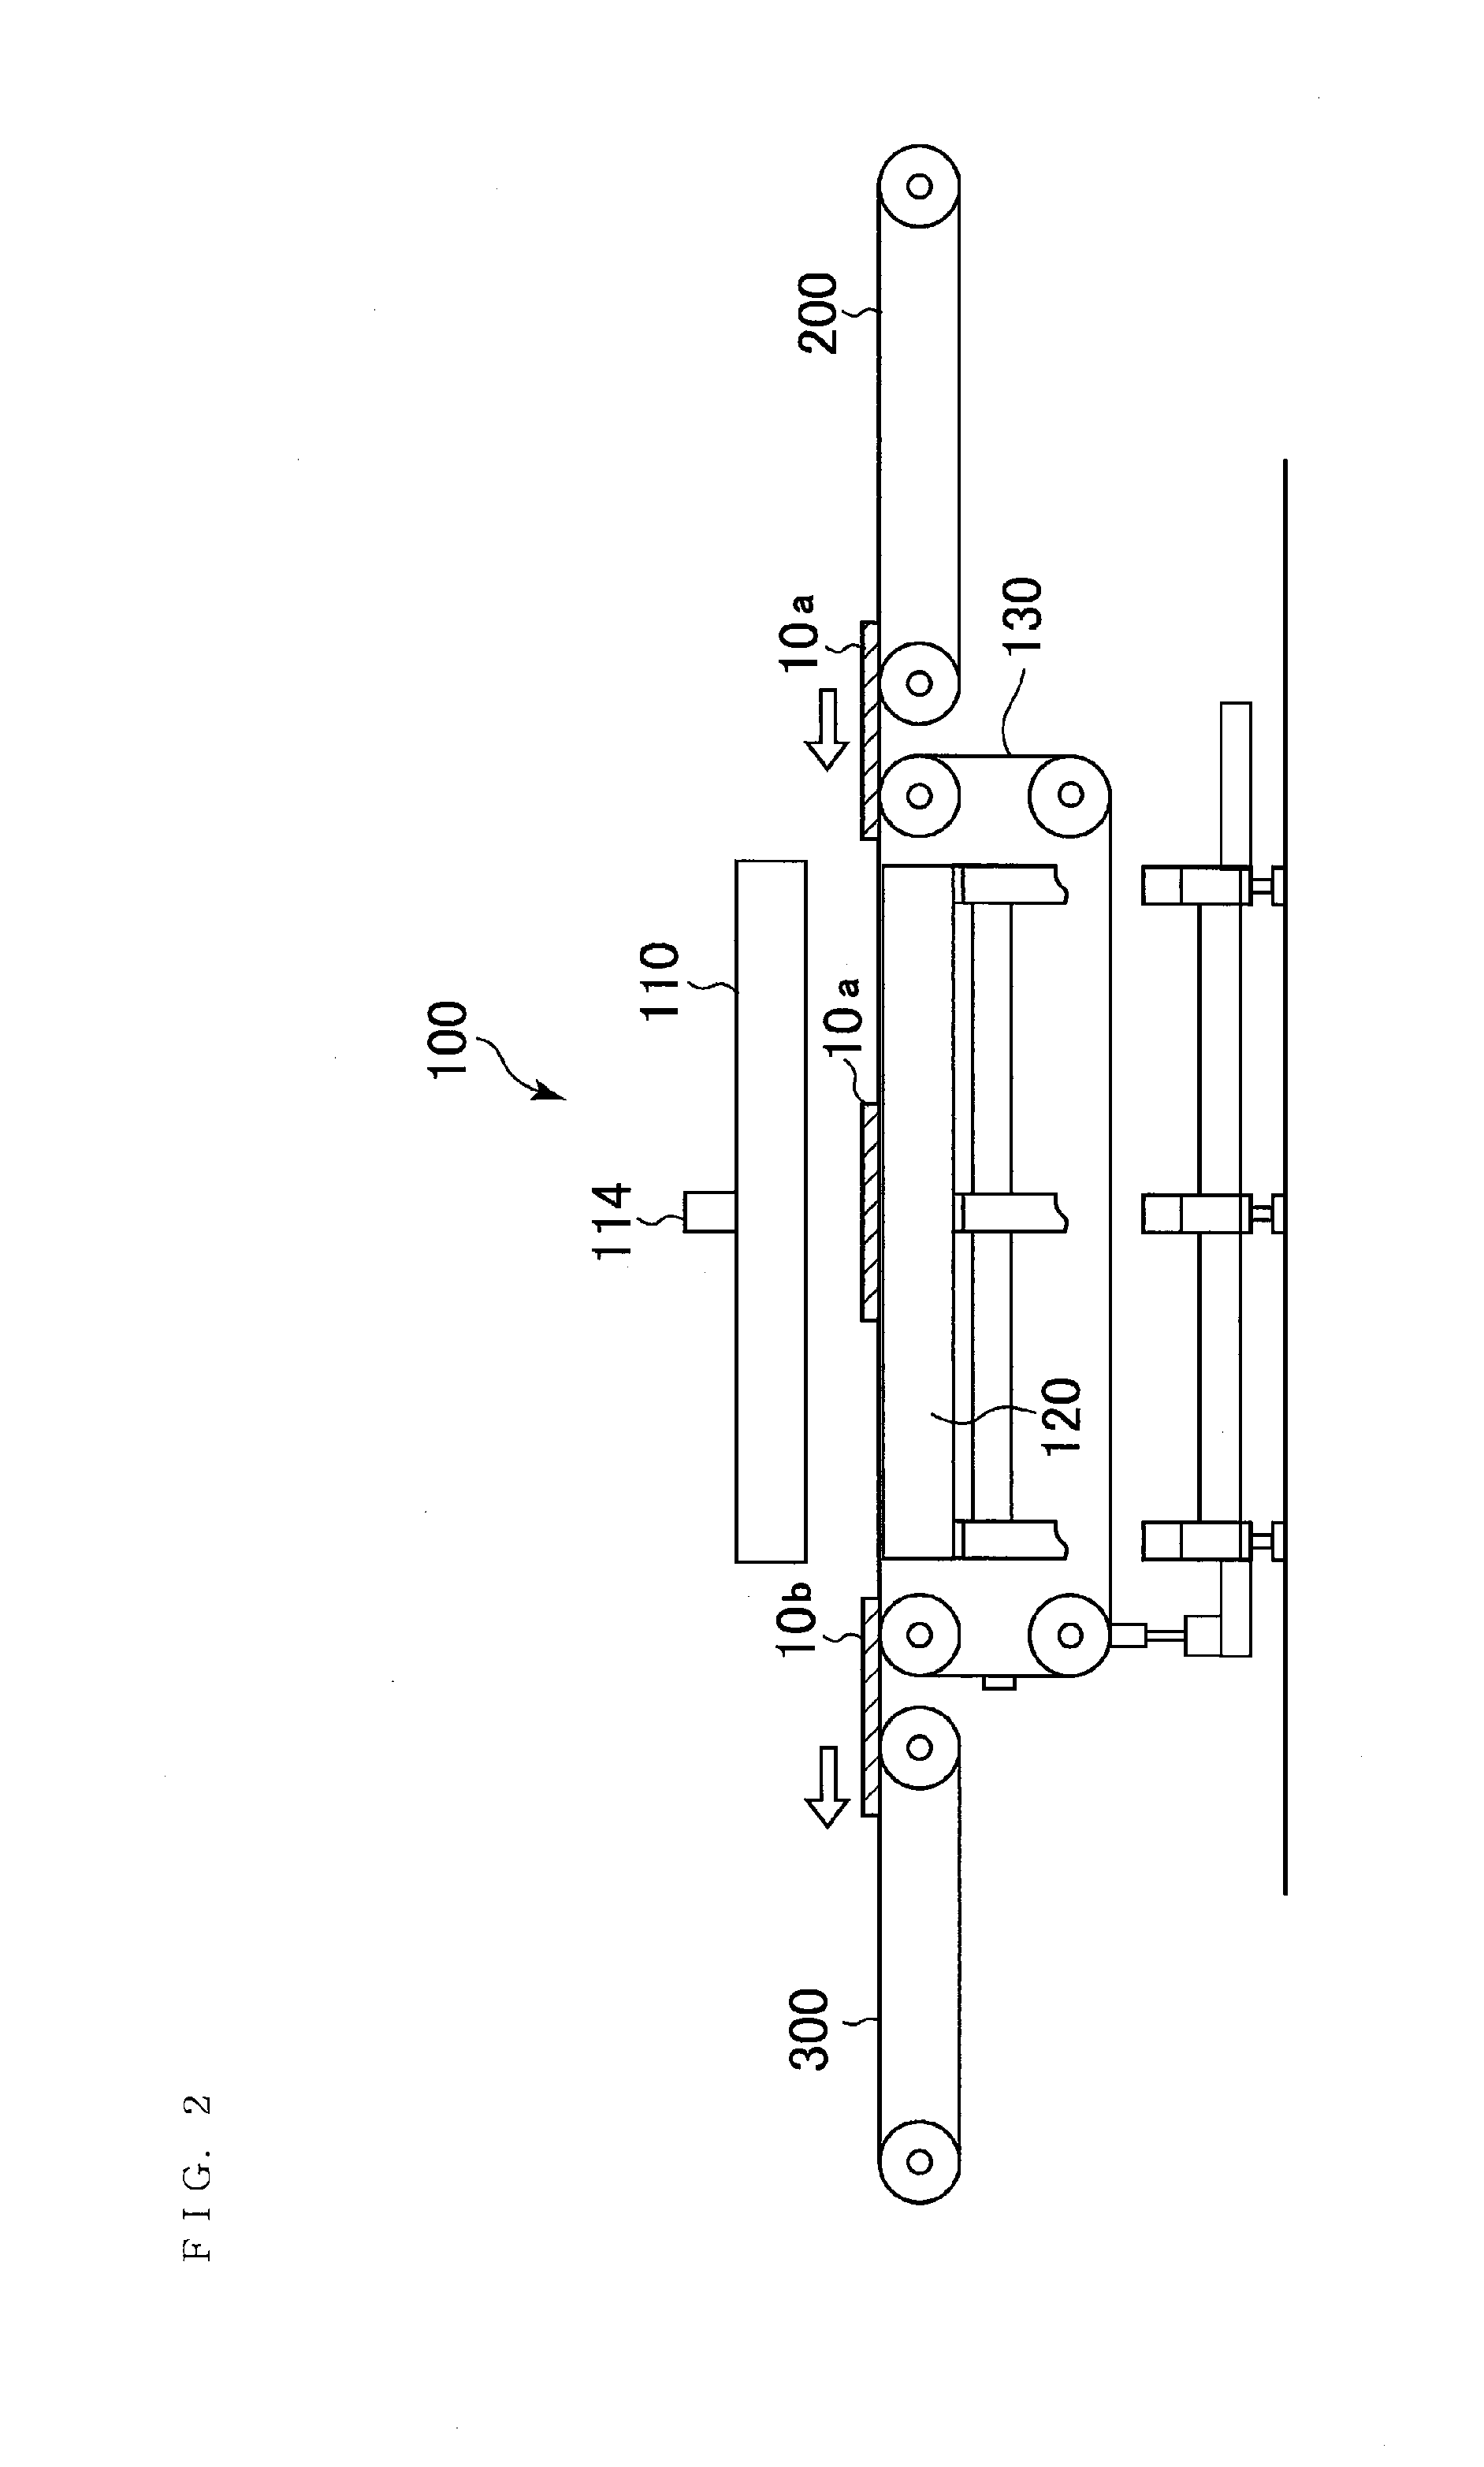 Diaphragm sheet, method for manufacturing solar cell module using diaphragm sheet, and lamination method using laminator for solar cell module manufacture